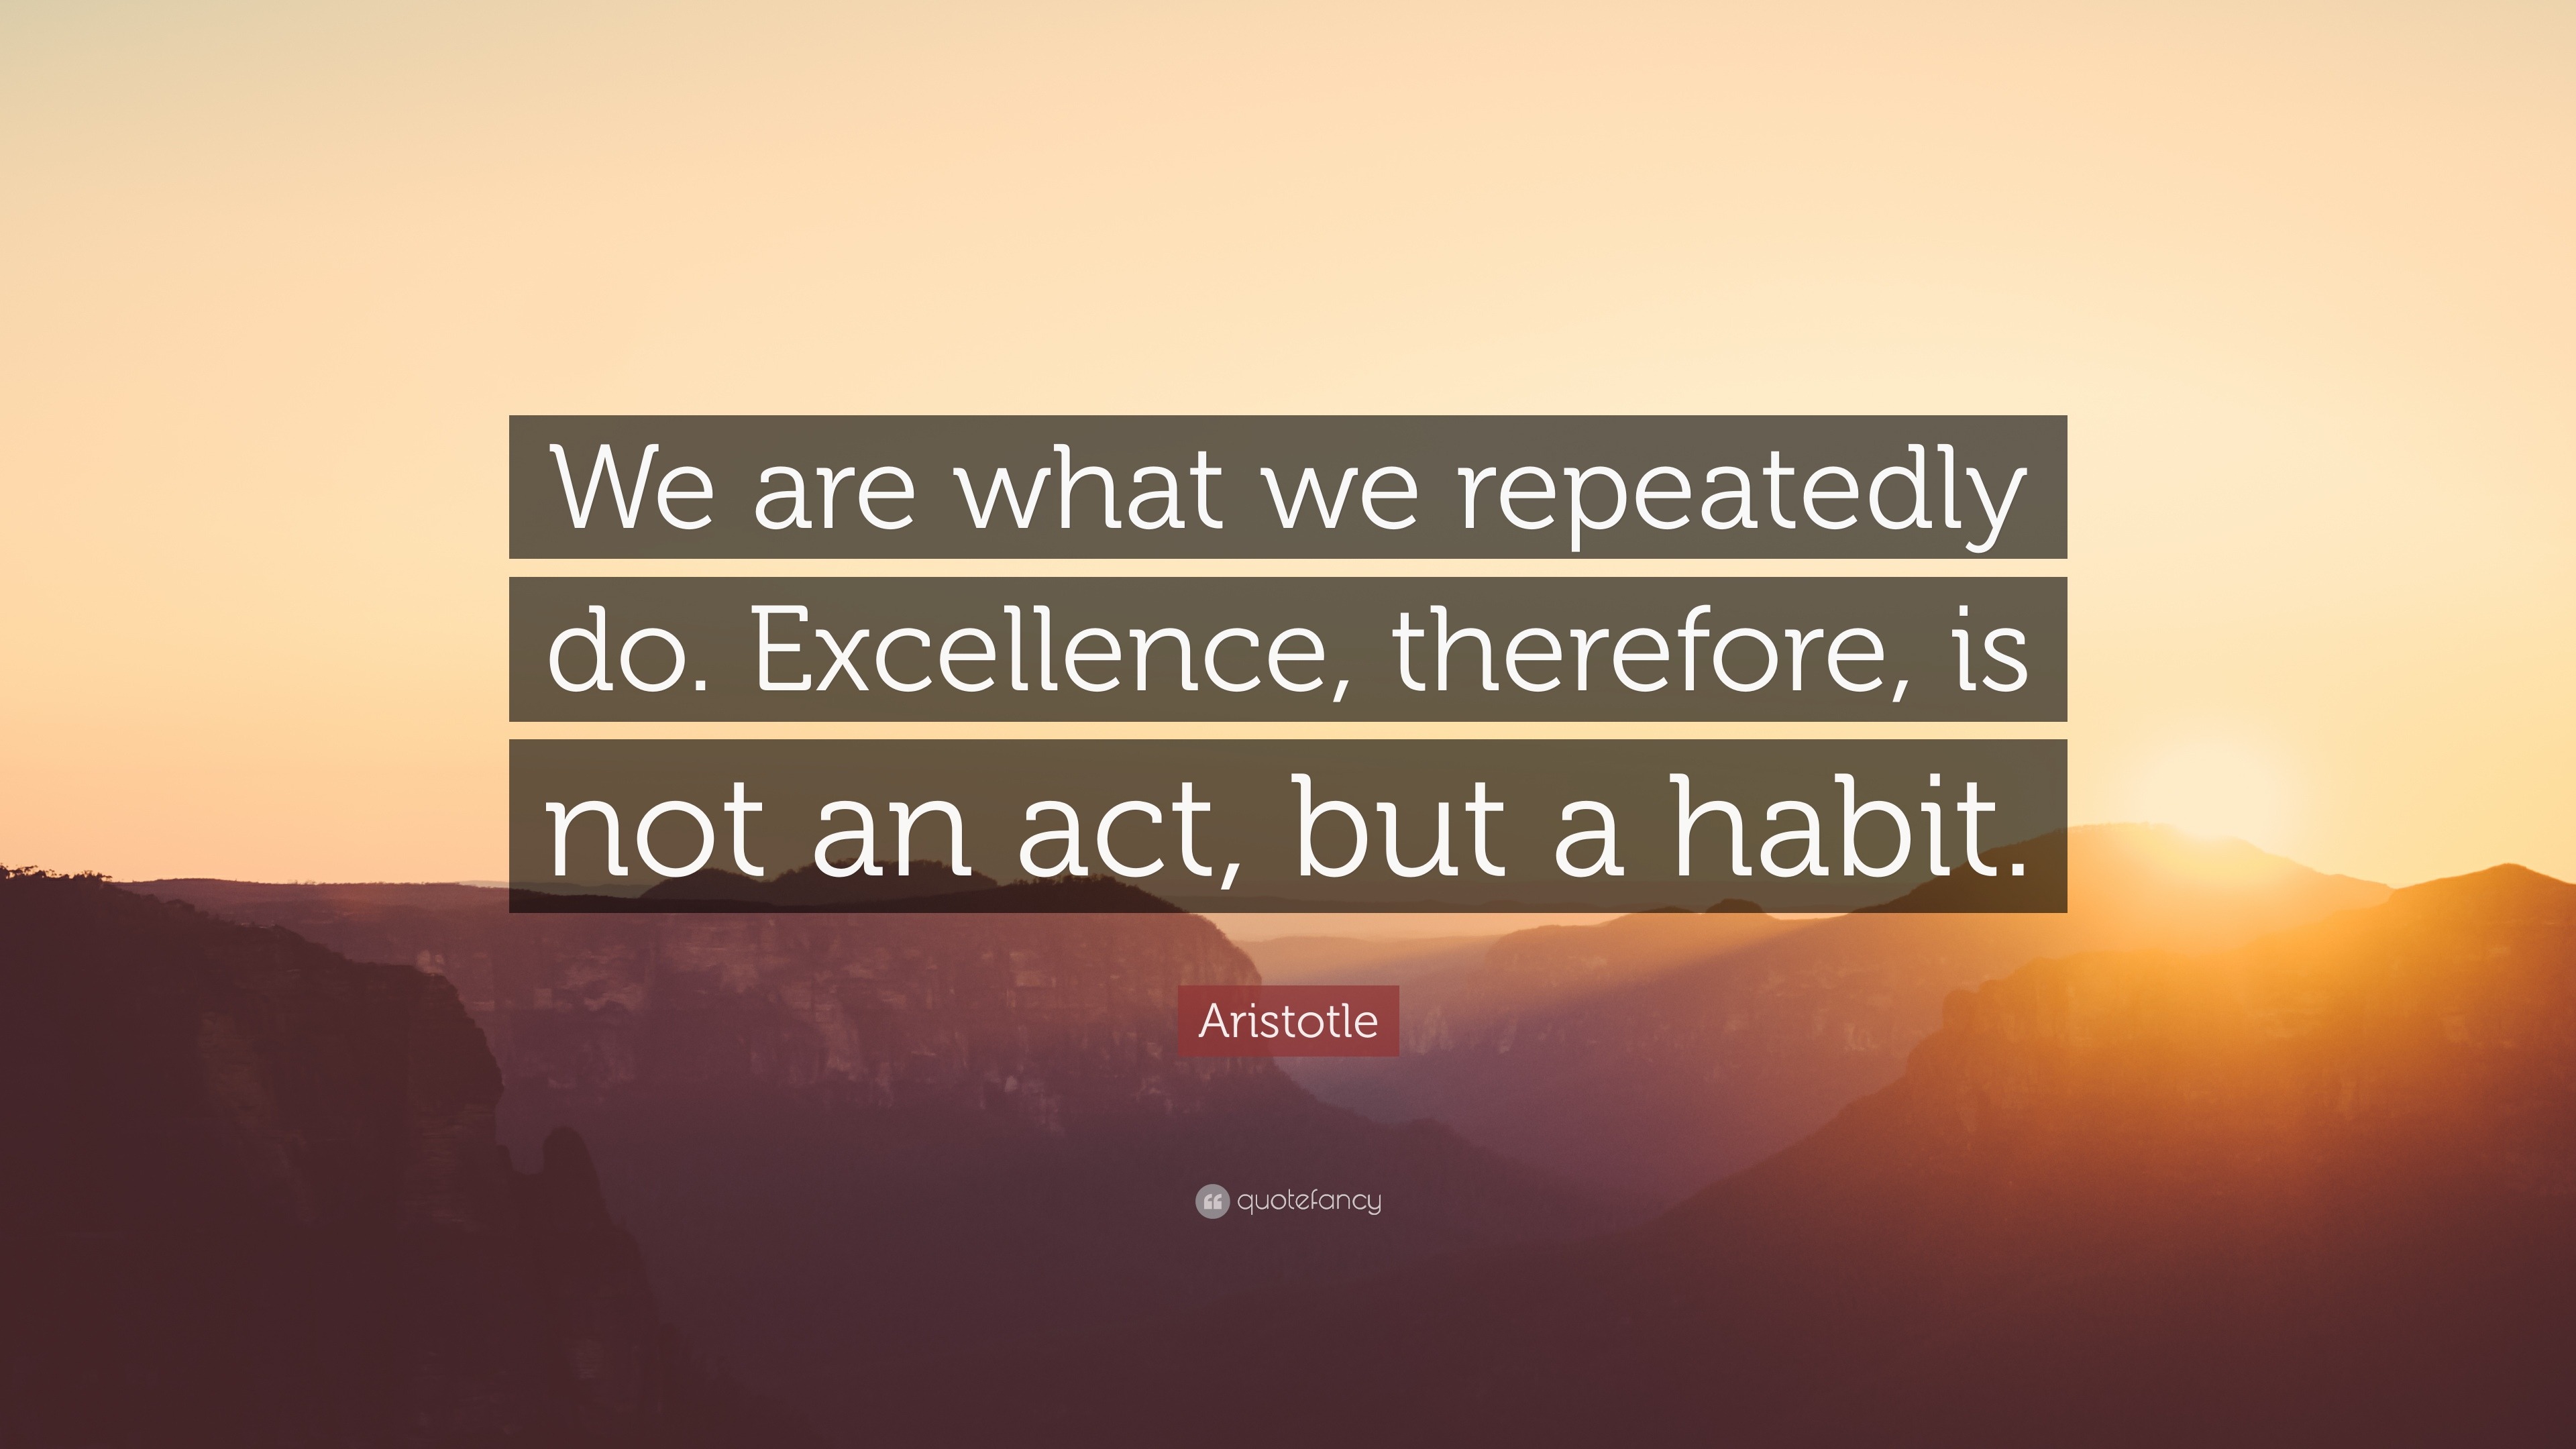 Aristotle Quote: “We are what we repeatedly do. Excellence, therefore